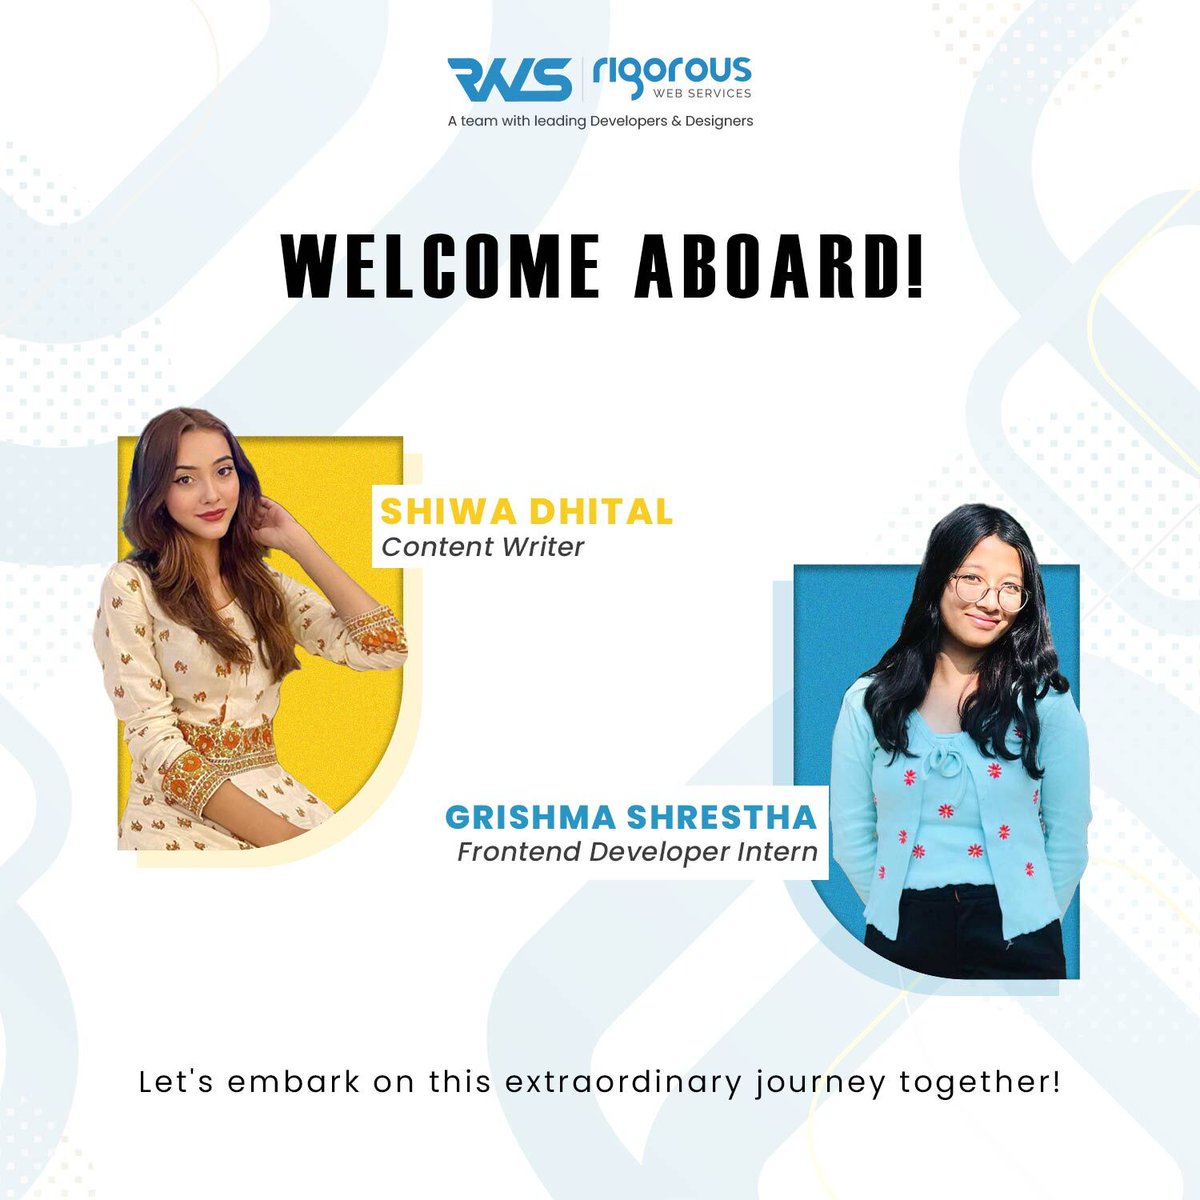 🎉 Welcome to the team! 🎉
We're thrilled to have you on board and can't wait to begin this exciting journey together. Get ready for a rollercoaster of growth, learning, and achievement!
#teamtogether #newbeginnings #welcomeaboard #newemployee #rigorousweb